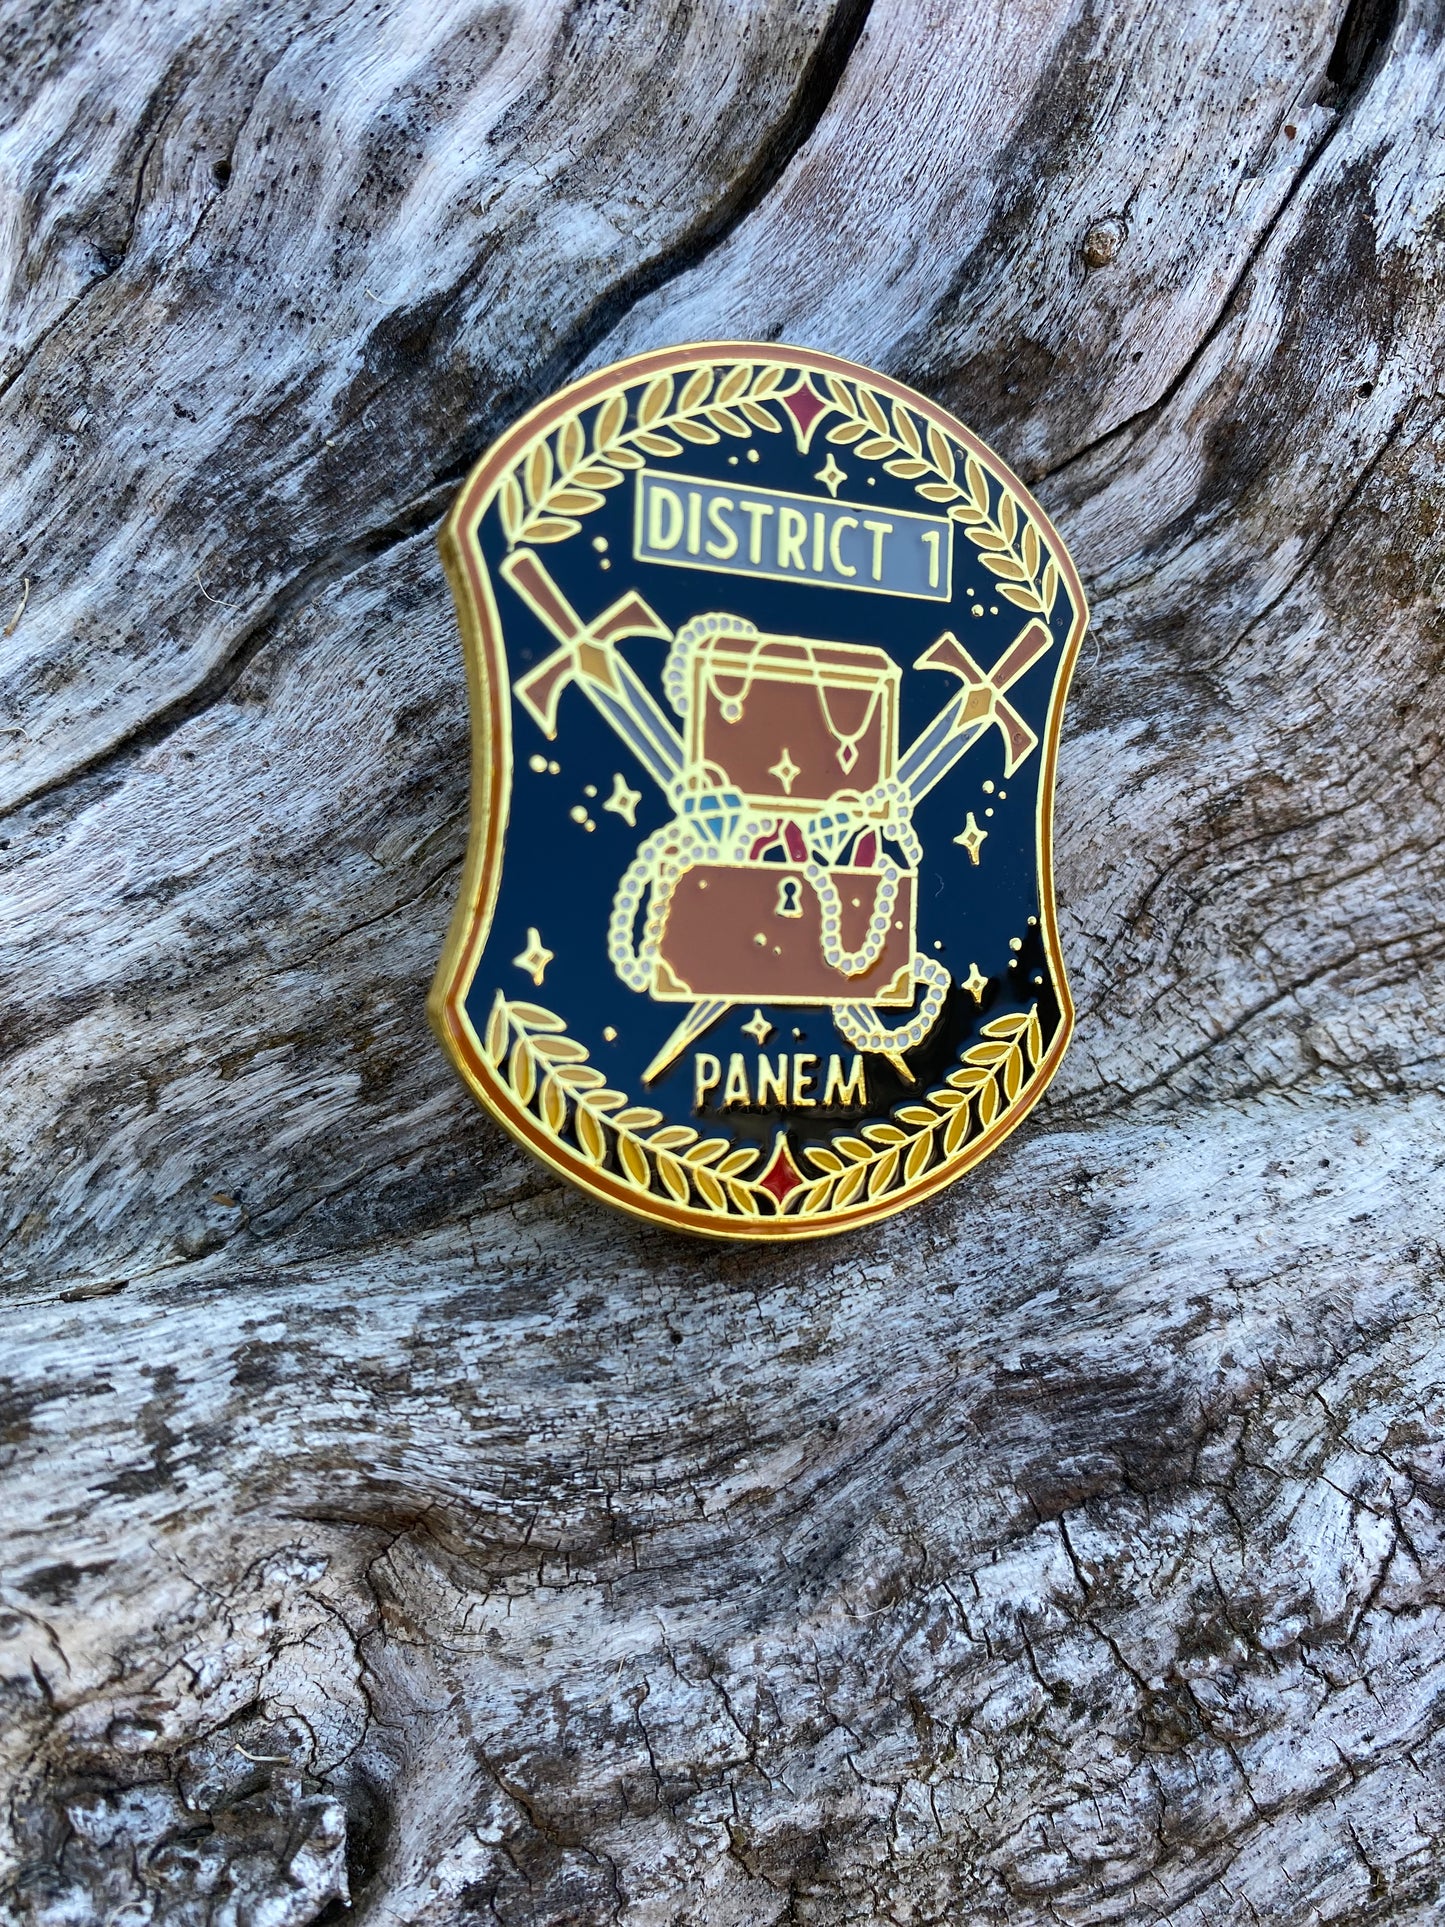 The Hunger Games District 1 Enamel Pin